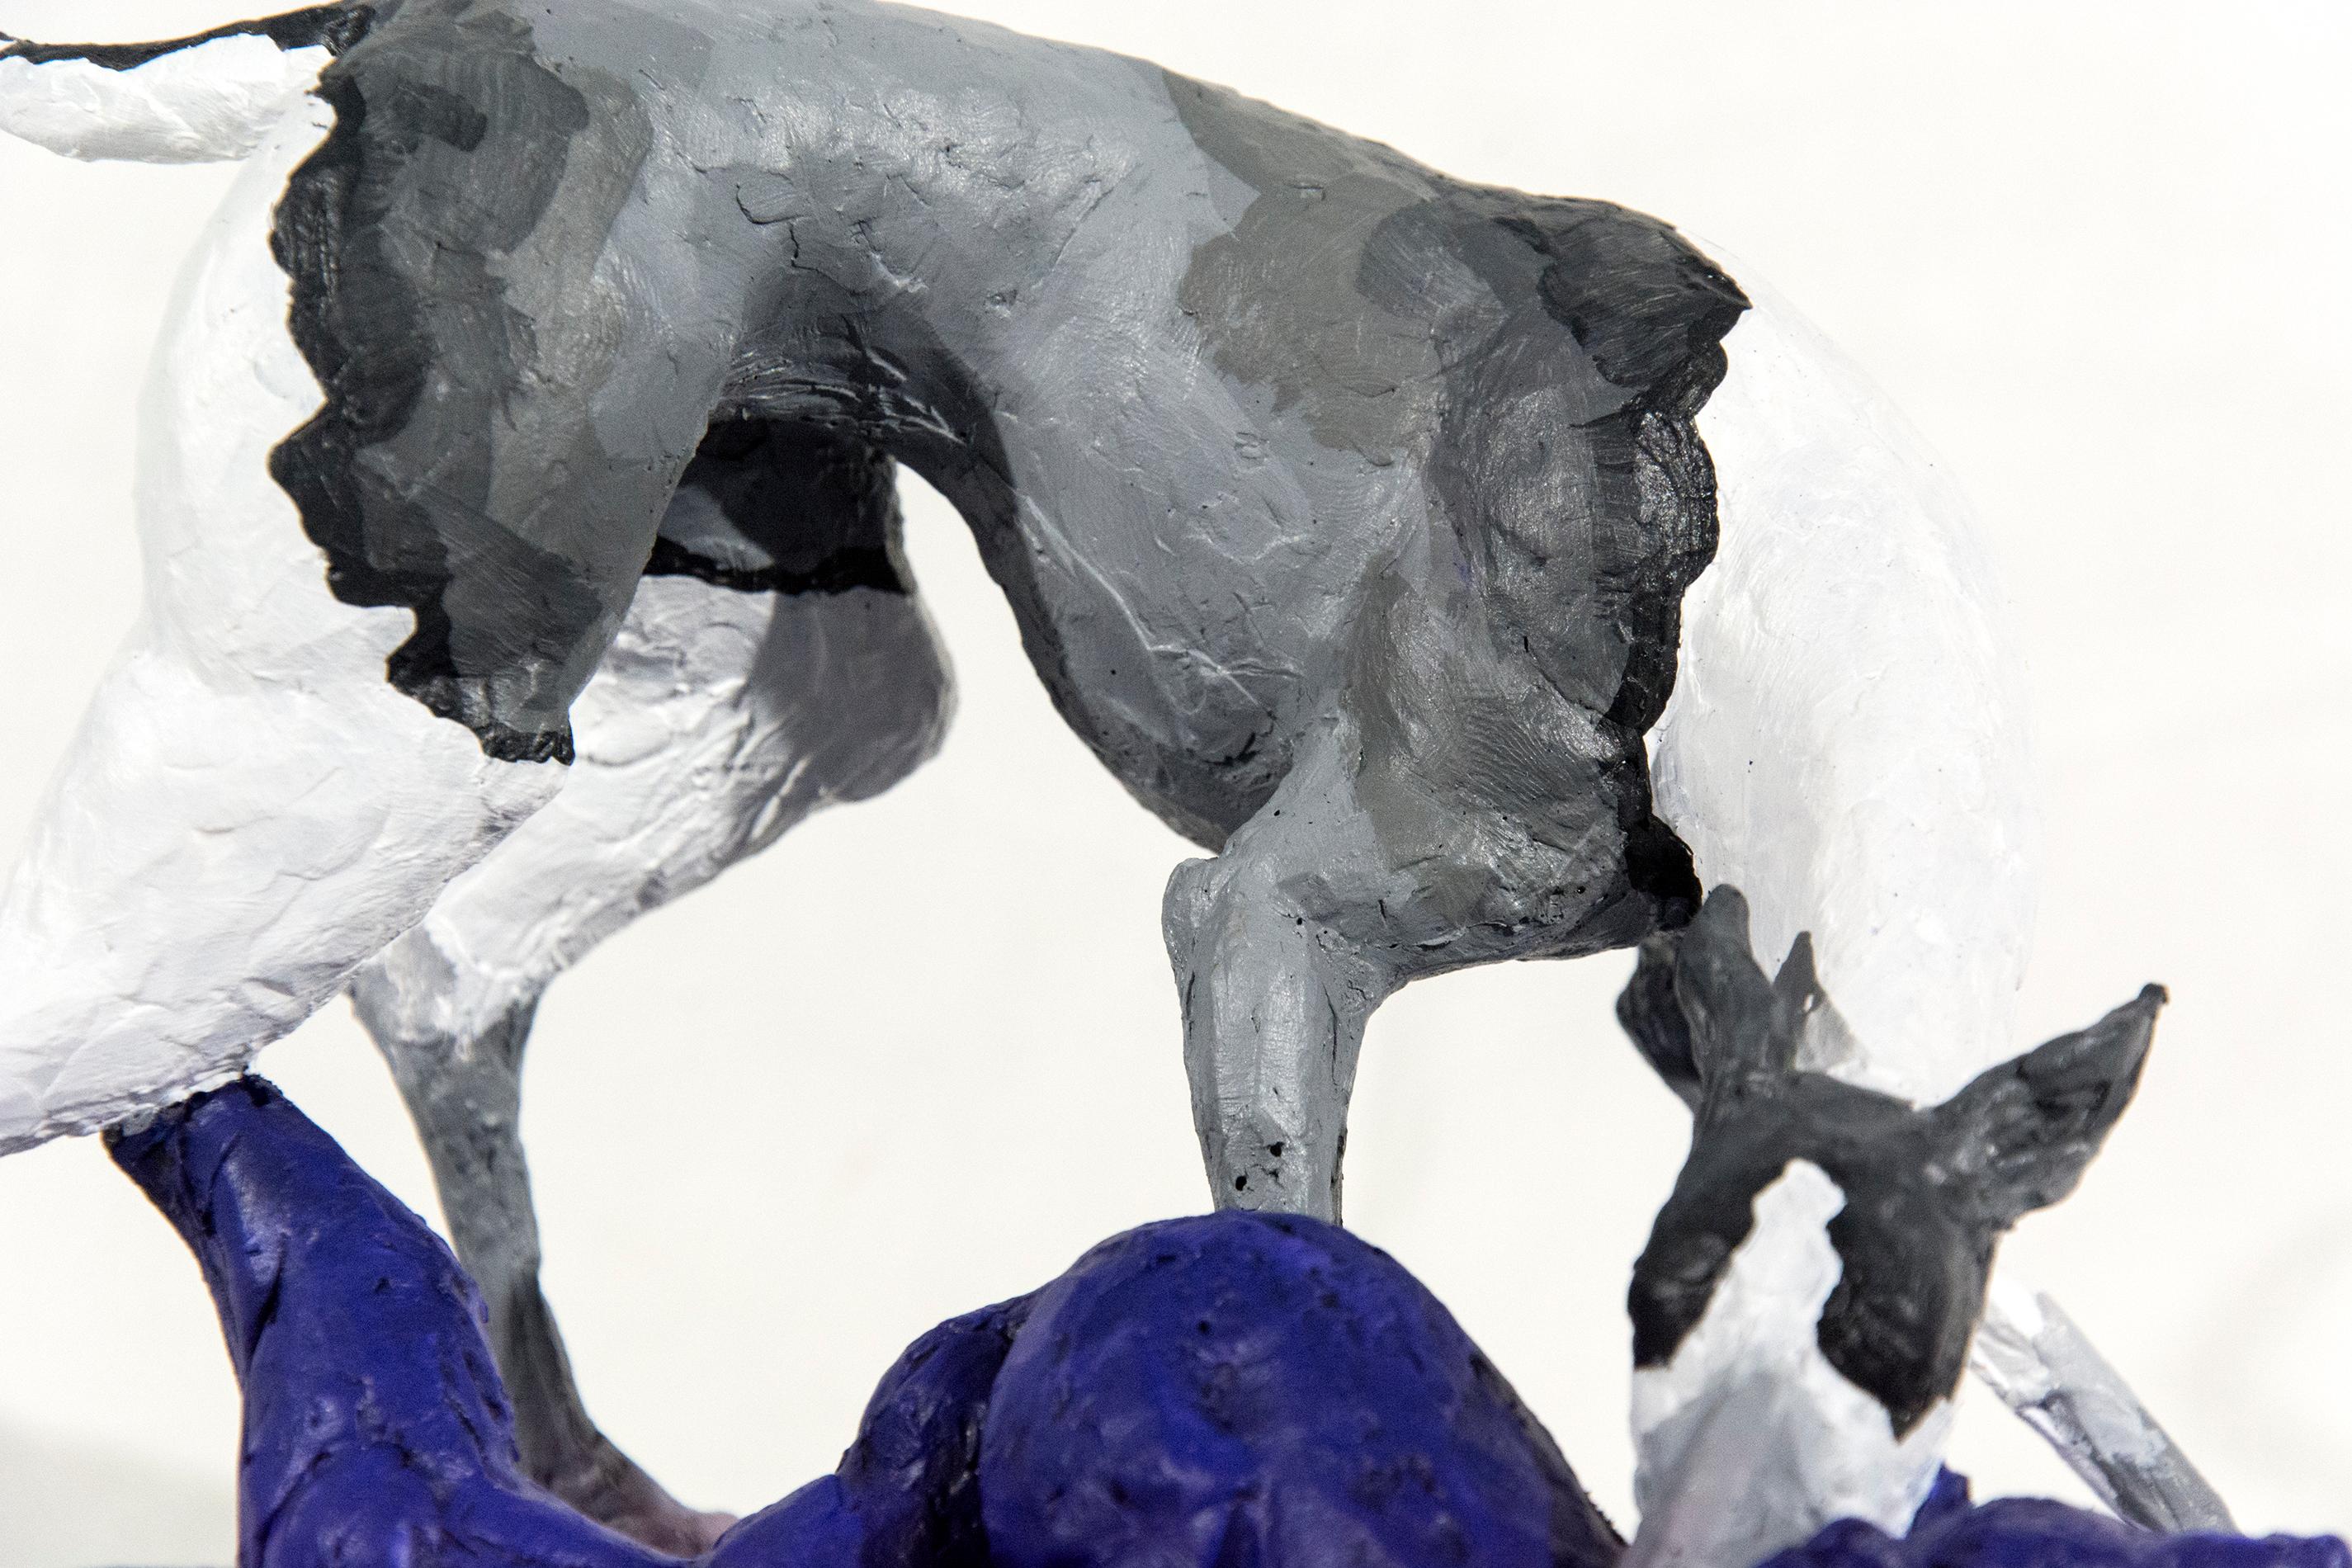 Hound 2/8 - small, grey, white, blue, figurative, dog, wildlife, resin sculpture - Gray Figurative Sculpture by Nicholas Crombach